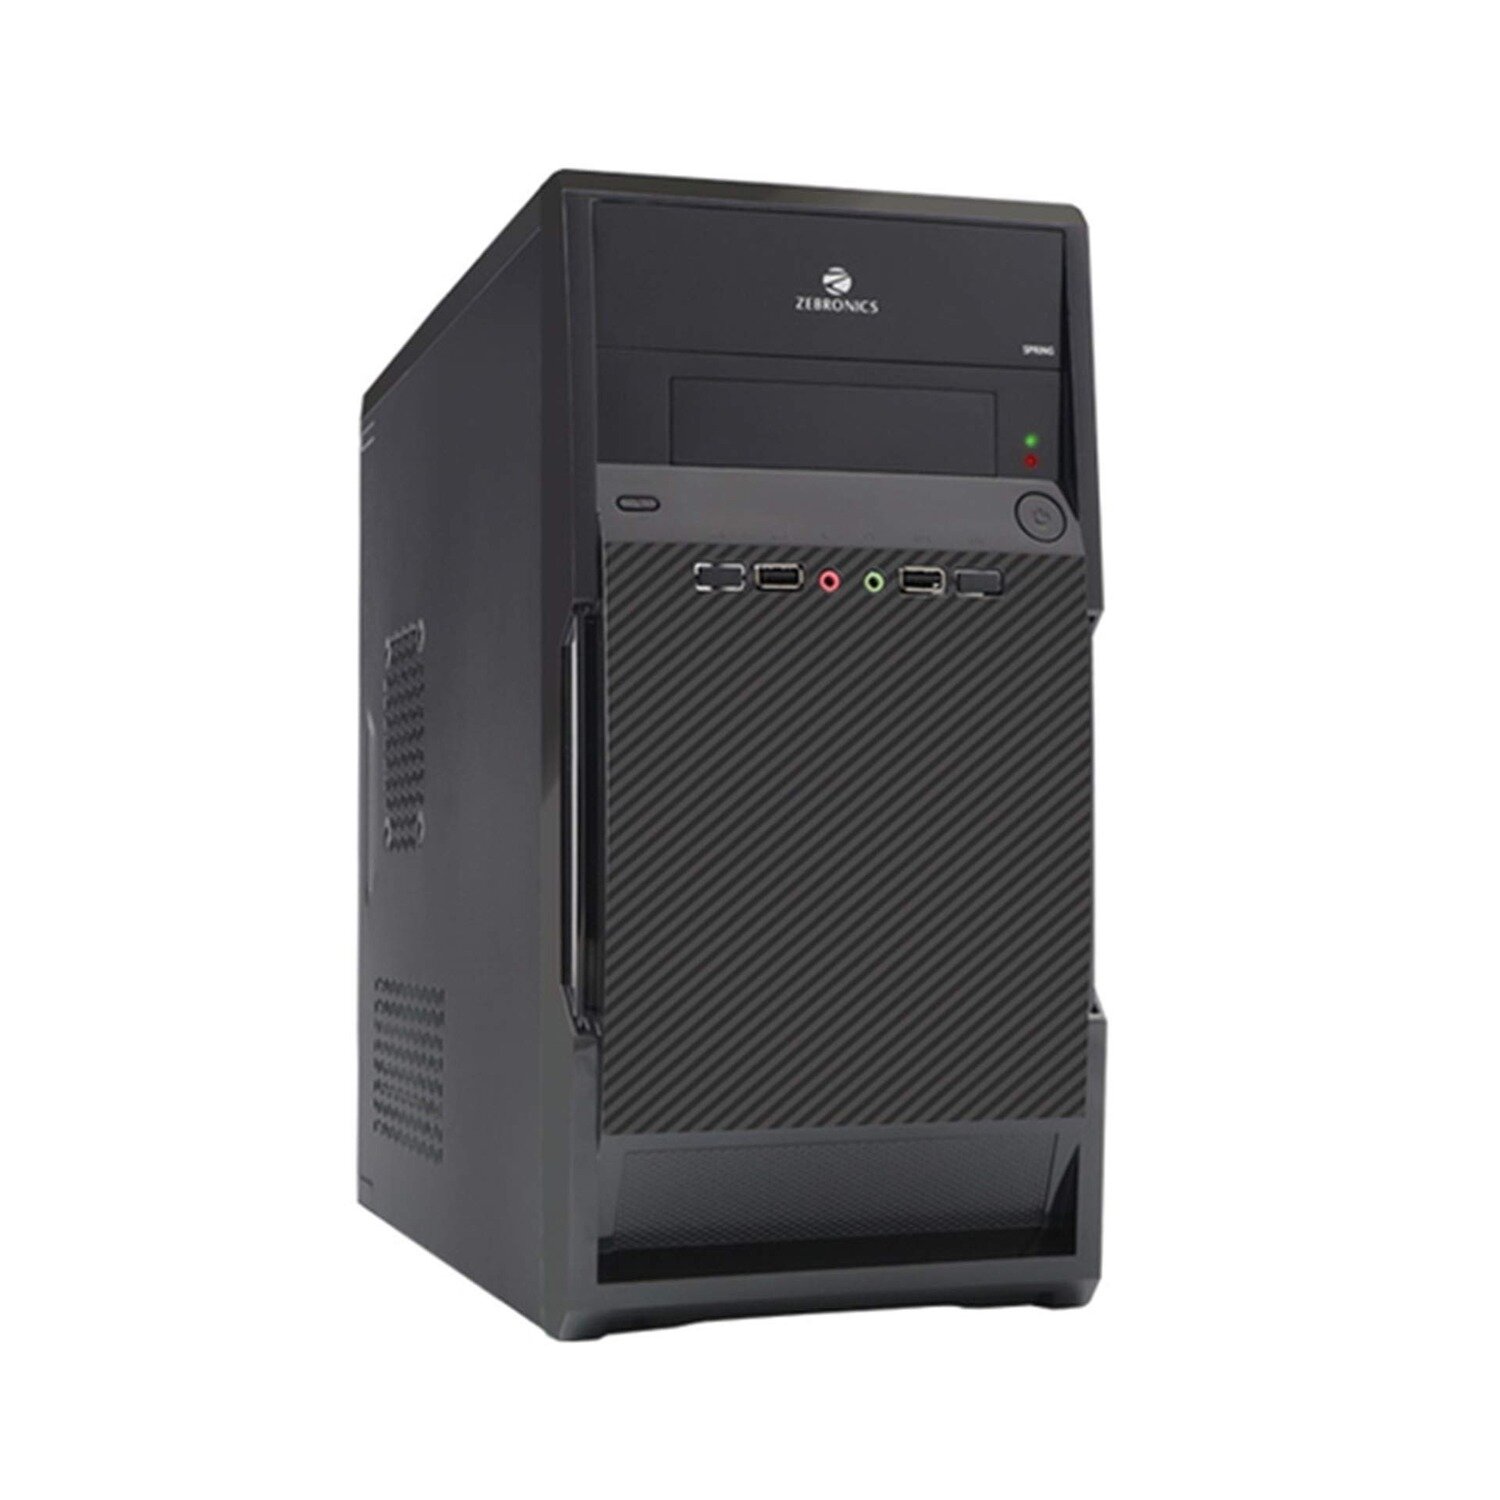 Core I5-650 3.2Ghz Desktop PC for Home & Office - 4GB RAM / 120GB SSD